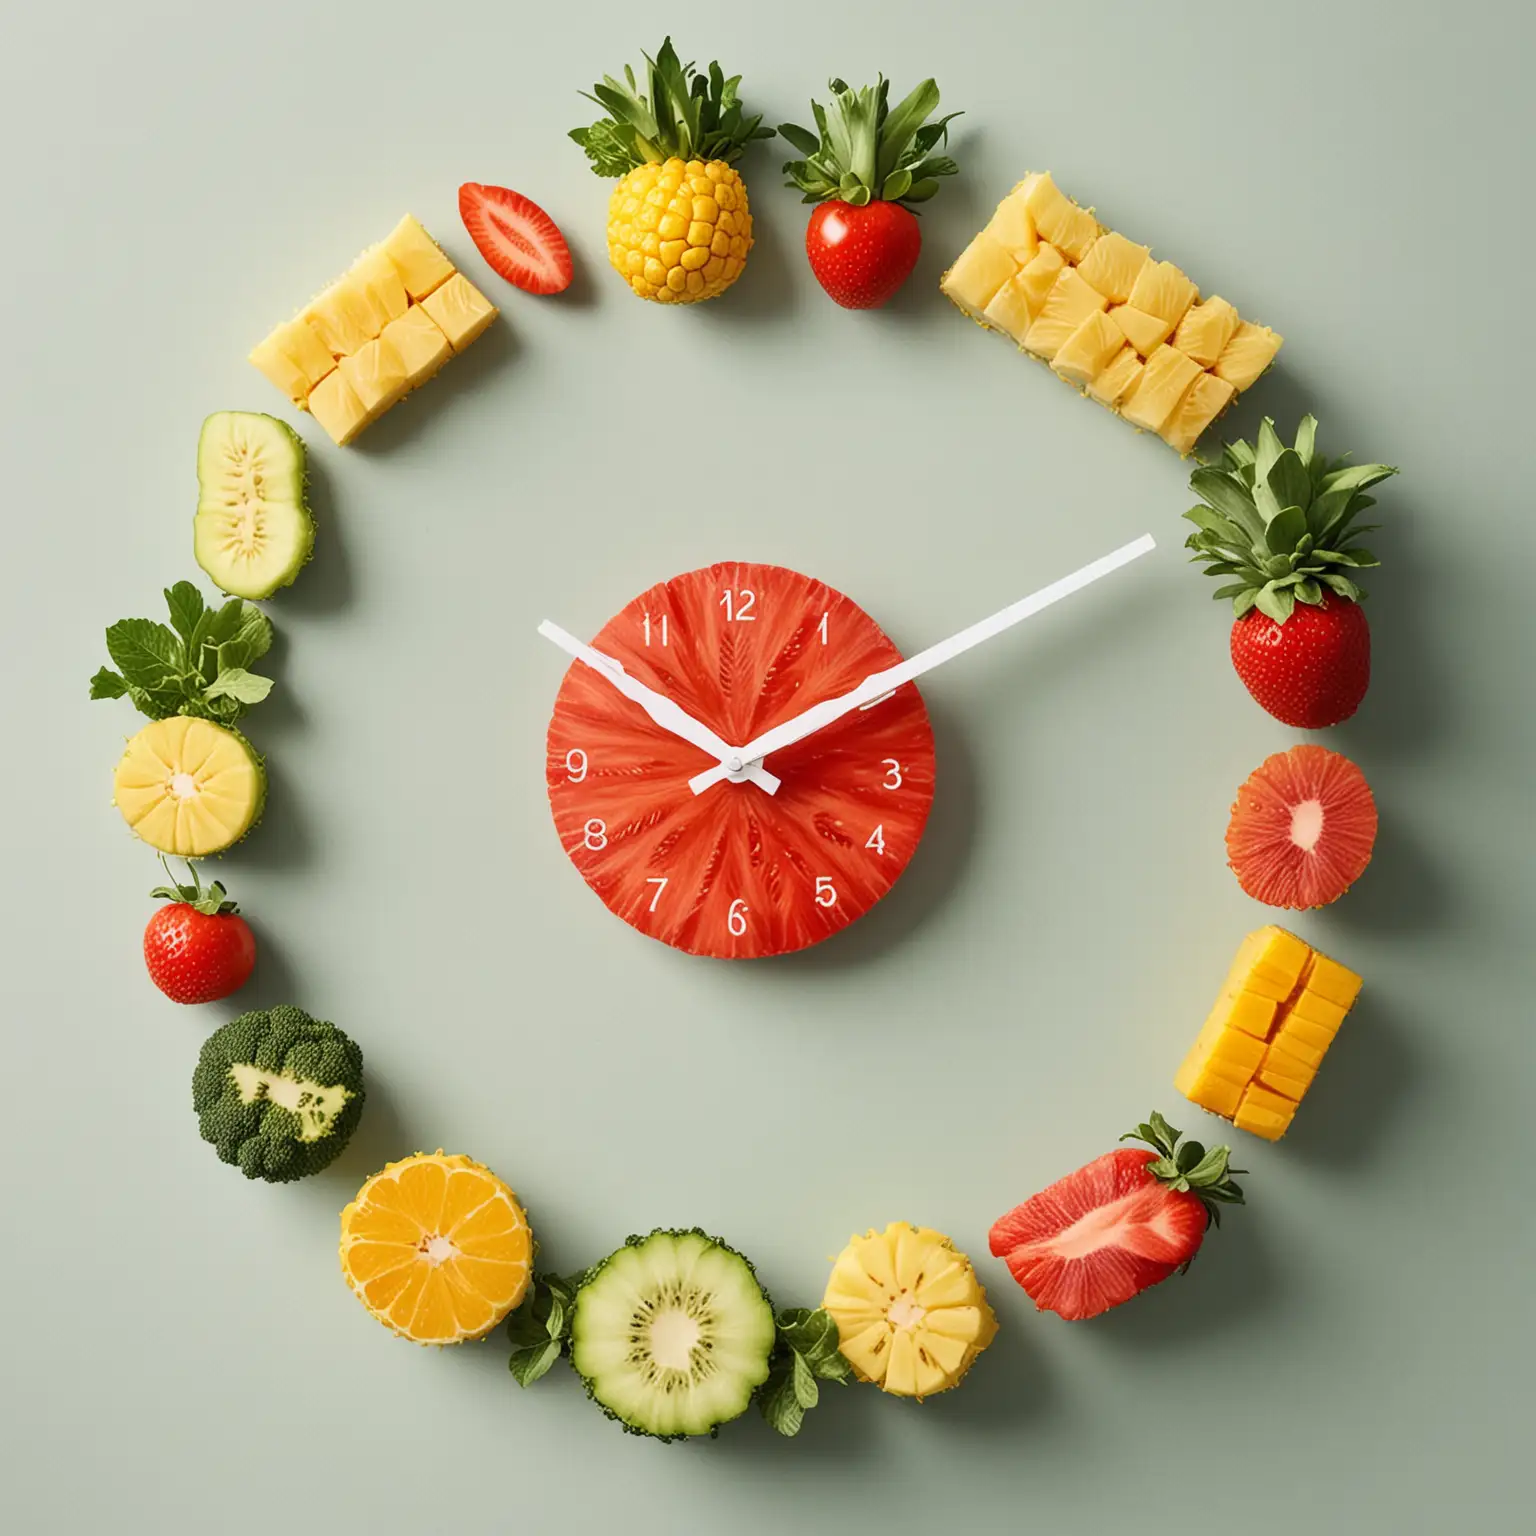 simple clock made from only fruits like pineapple, strawberries, grapefruit and vegetables like corn, cucumber, broccoli, carrots, tomatoes, squash 